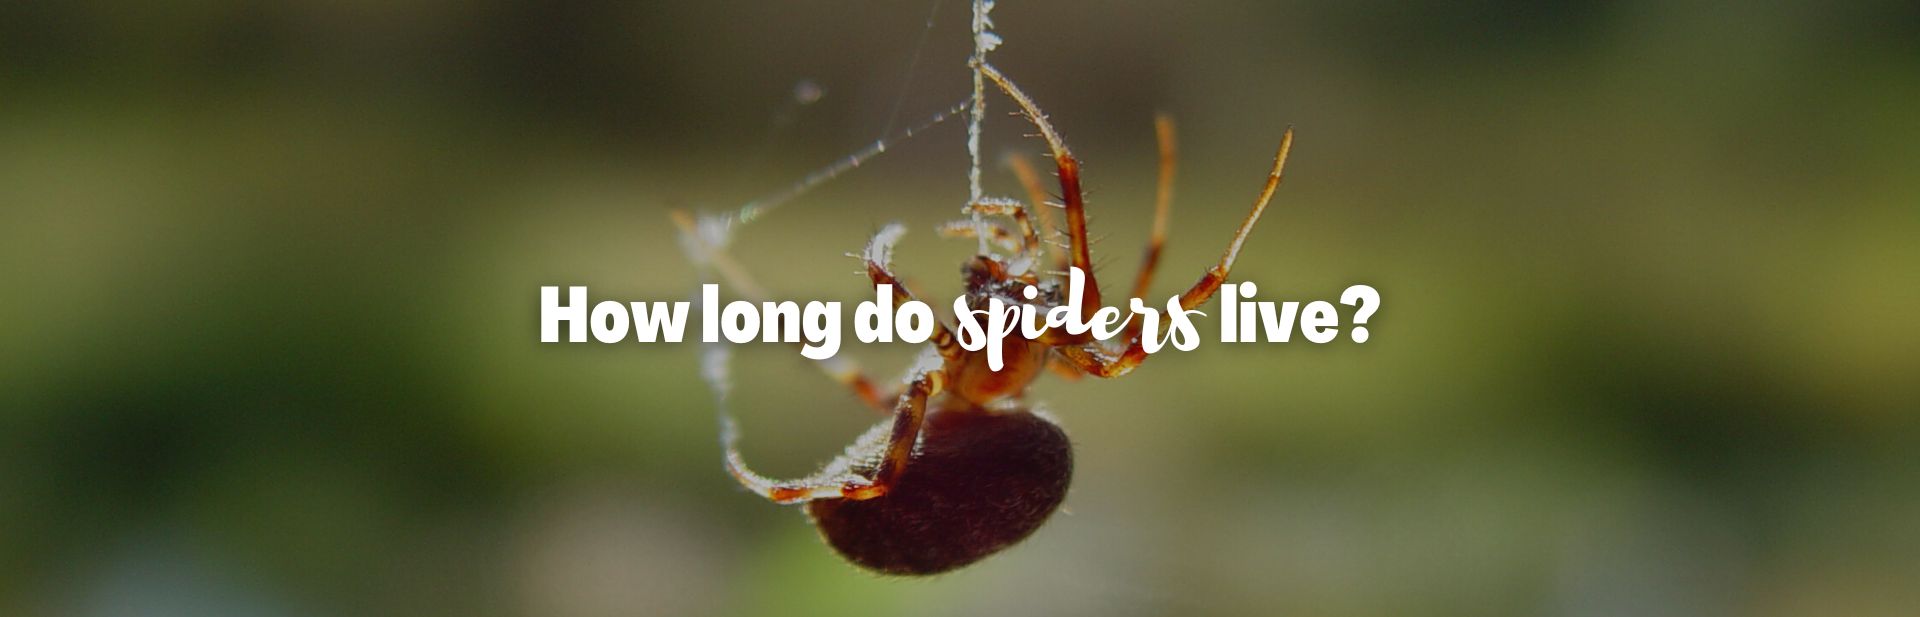 How Long Do Spiders Live? The Creepy Reality of a Spider’s Life Cycle